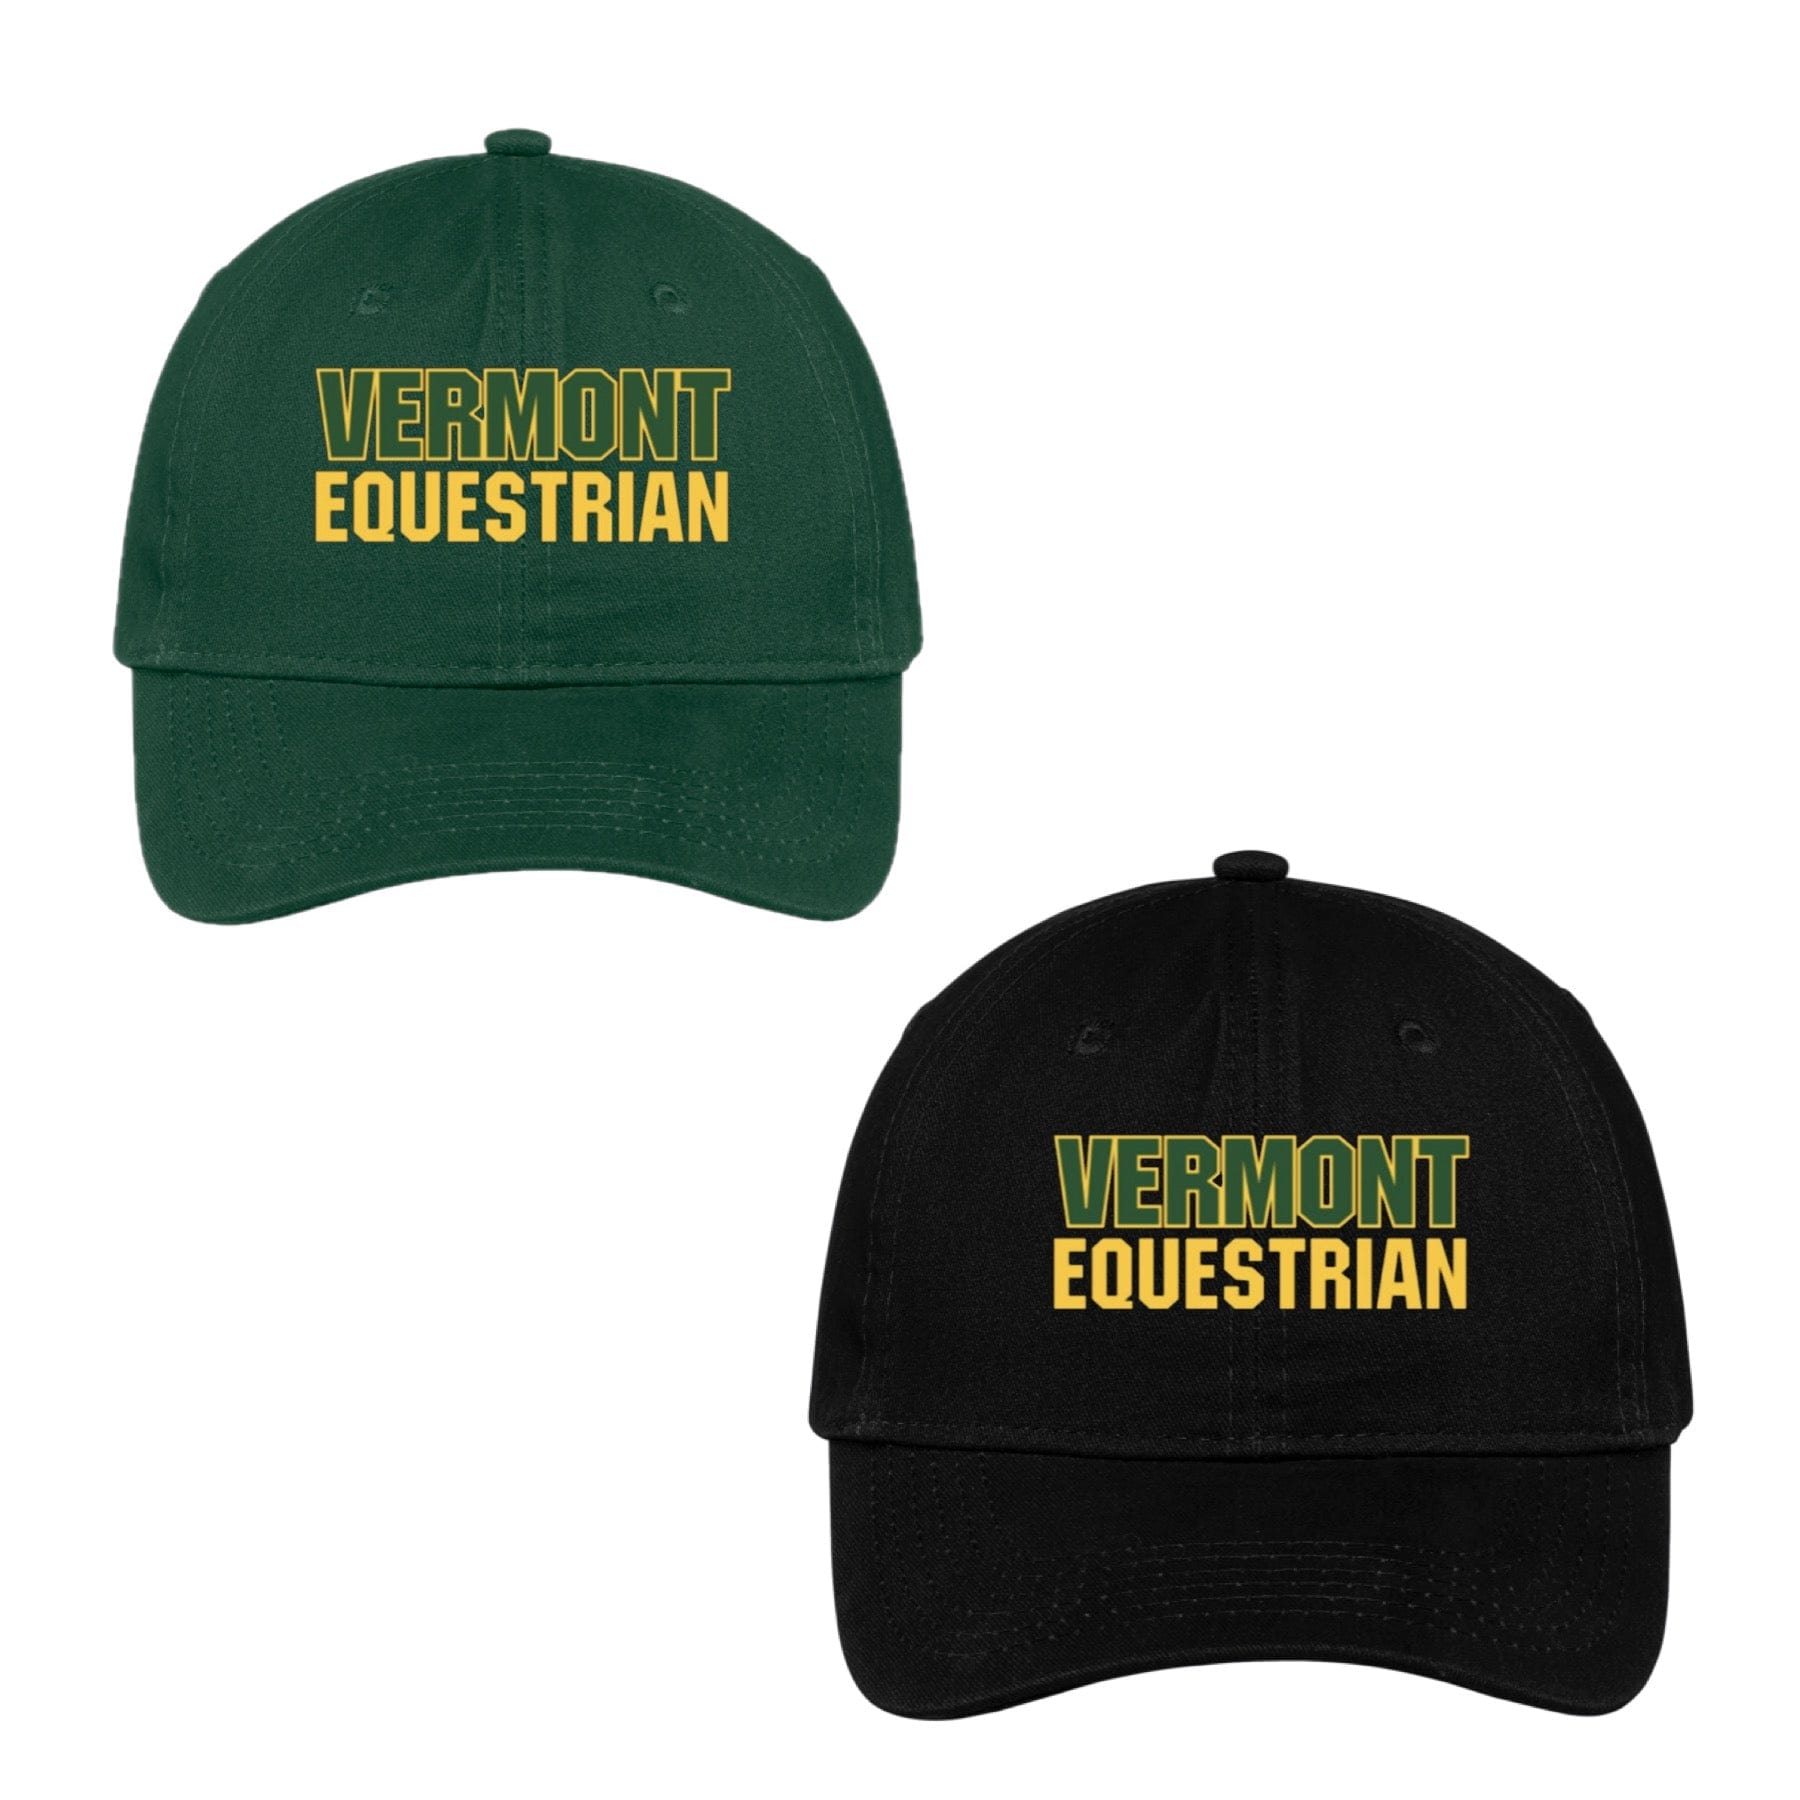 Equestrian Team Apparel Vermont Equestrian Baseball cap equestrian team apparel online tack store mobile tack store custom farm apparel custom show stable clothing equestrian lifestyle horse show clothing riding clothes horses equestrian tack store